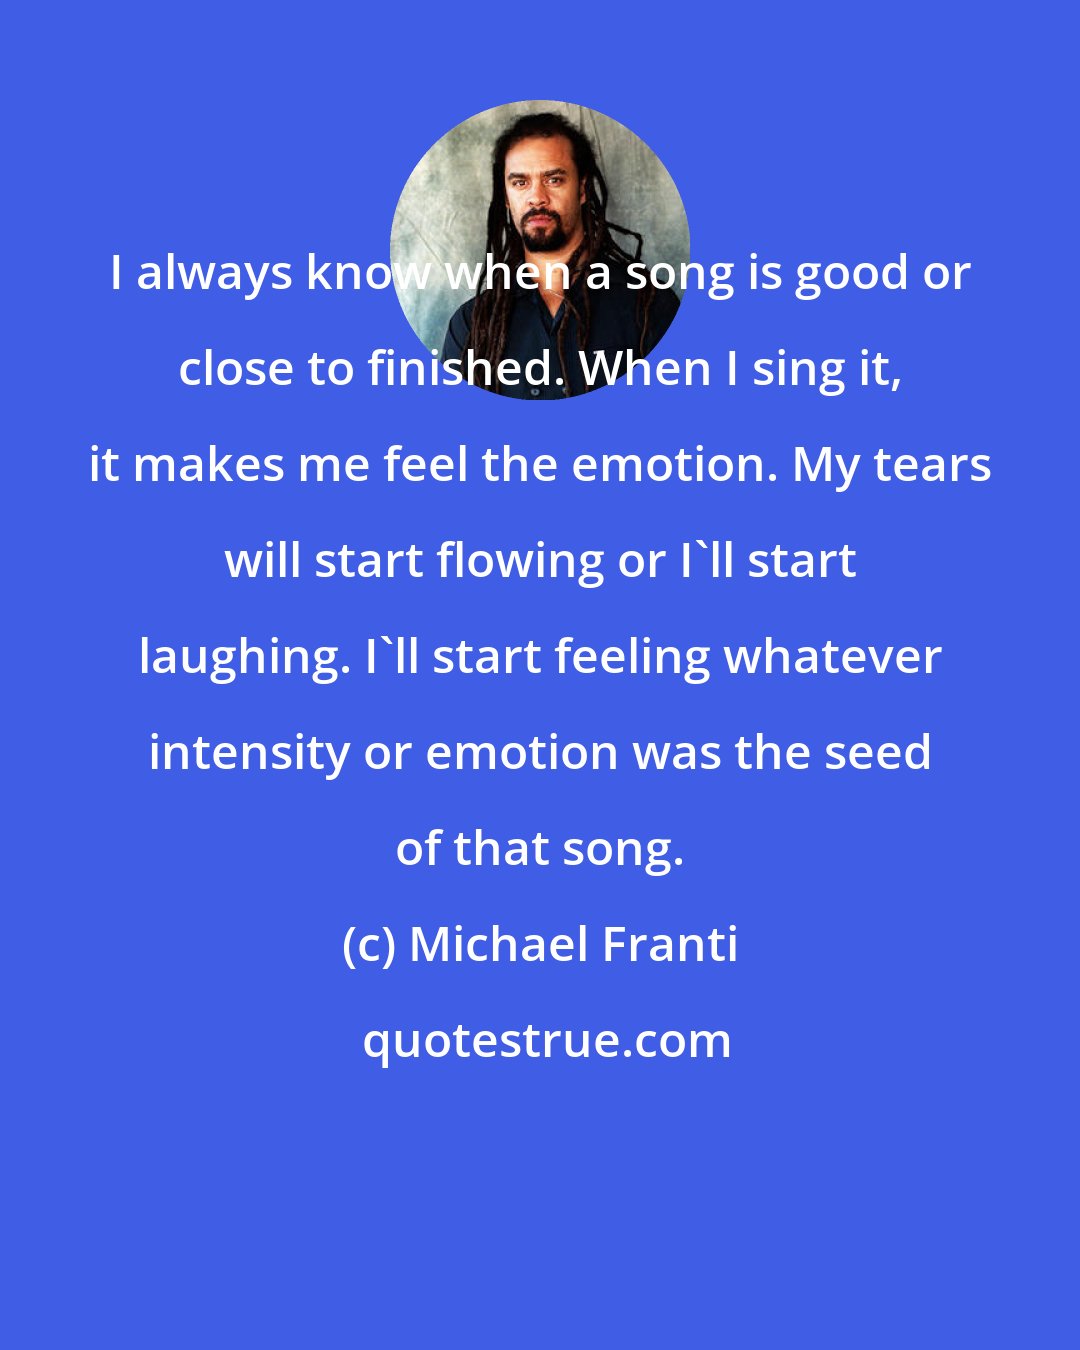 Michael Franti: I always know when a song is good or close to finished. When I sing it, it makes me feel the emotion. My tears will start flowing or I'll start laughing. I'll start feeling whatever intensity or emotion was the seed of that song.